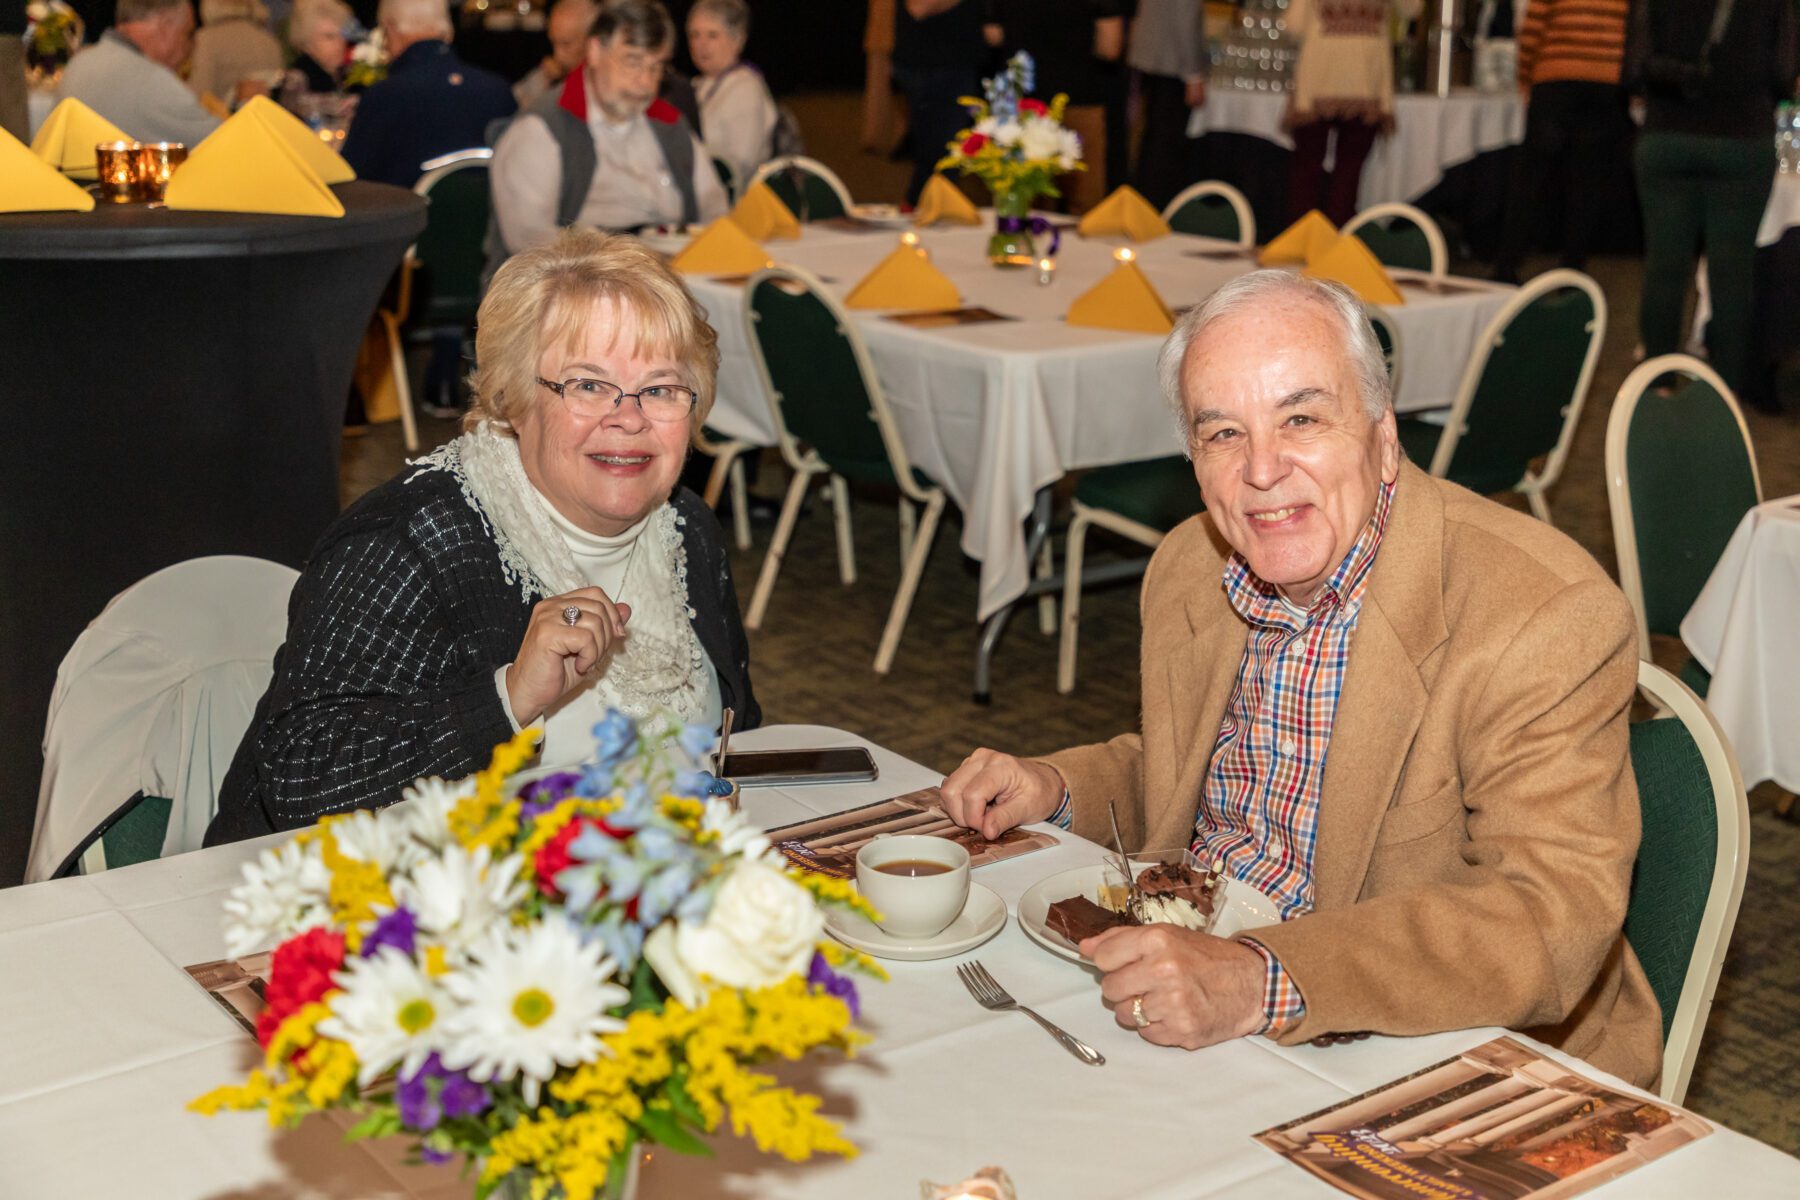 A couple smile at the camera while enjoying their Taste of Olivet.